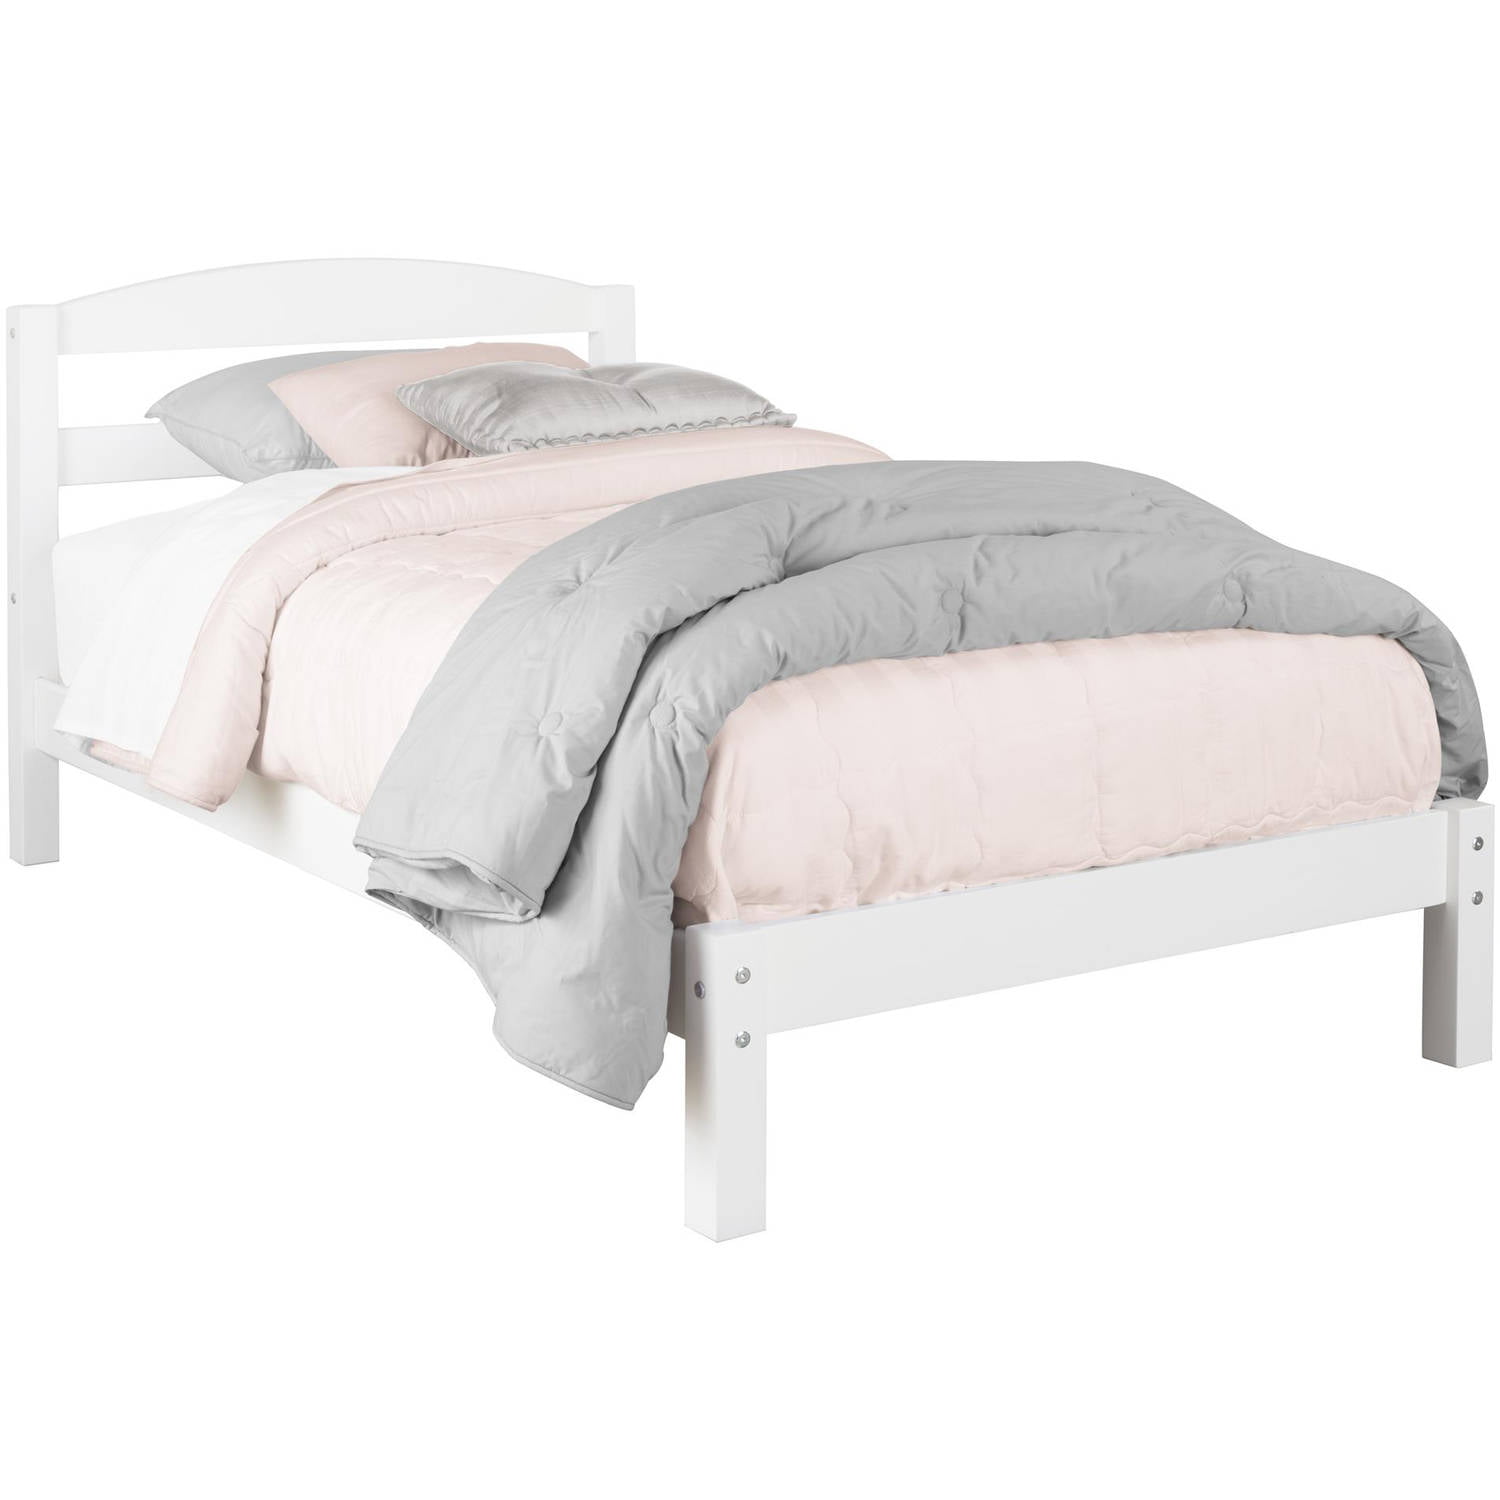 girls twin size bed